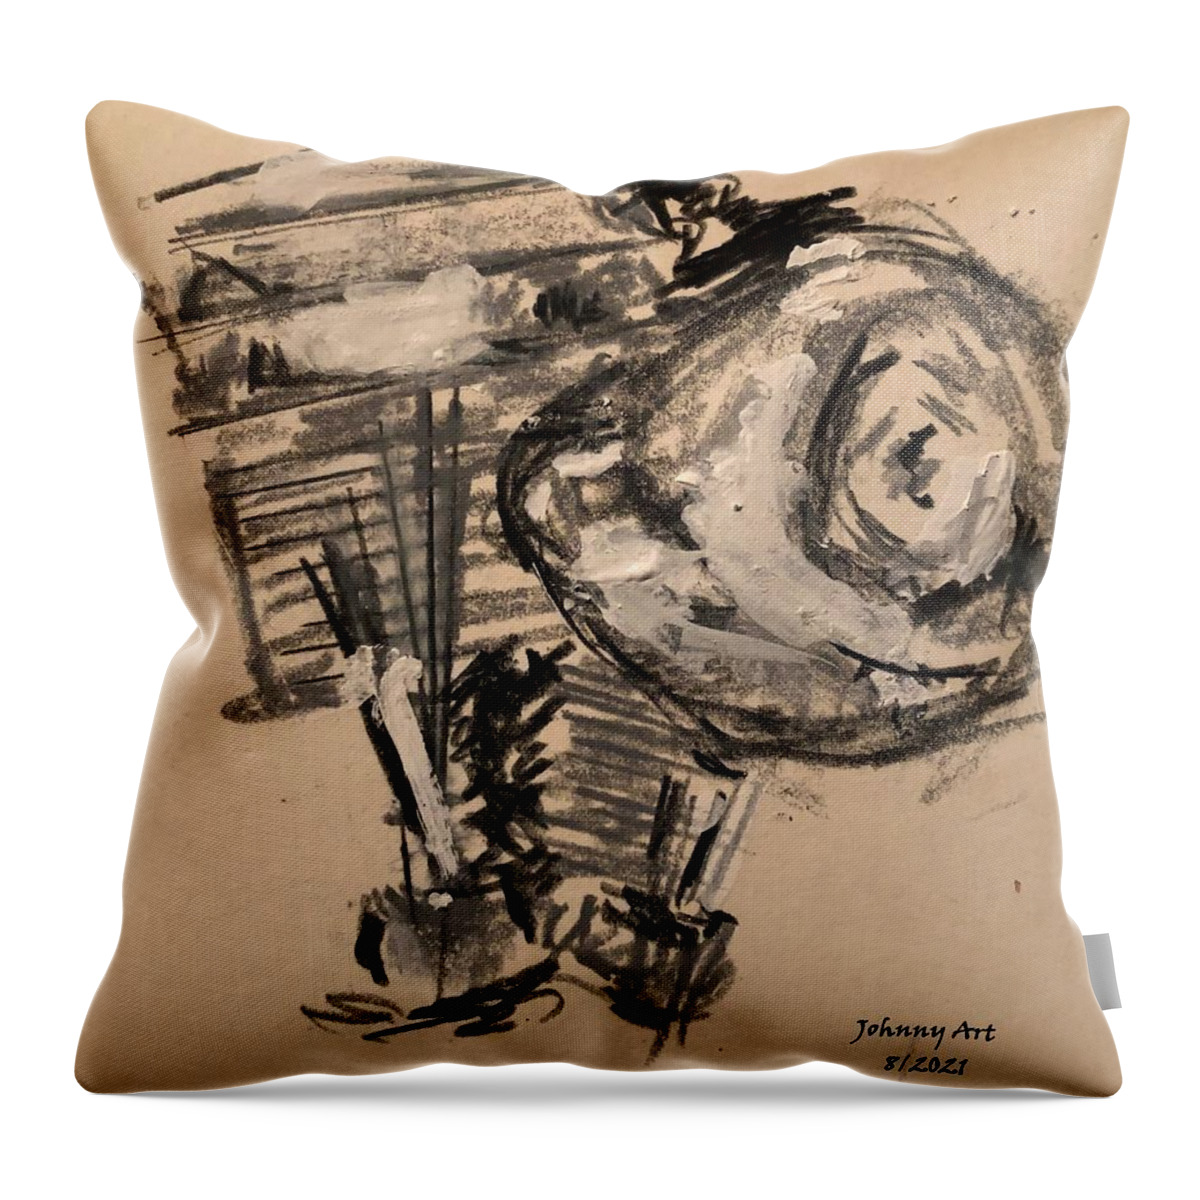 Harley Davidson St Augustine Beach Florida Usa Throw Pillow featuring the painting Motor Head by John Anderson